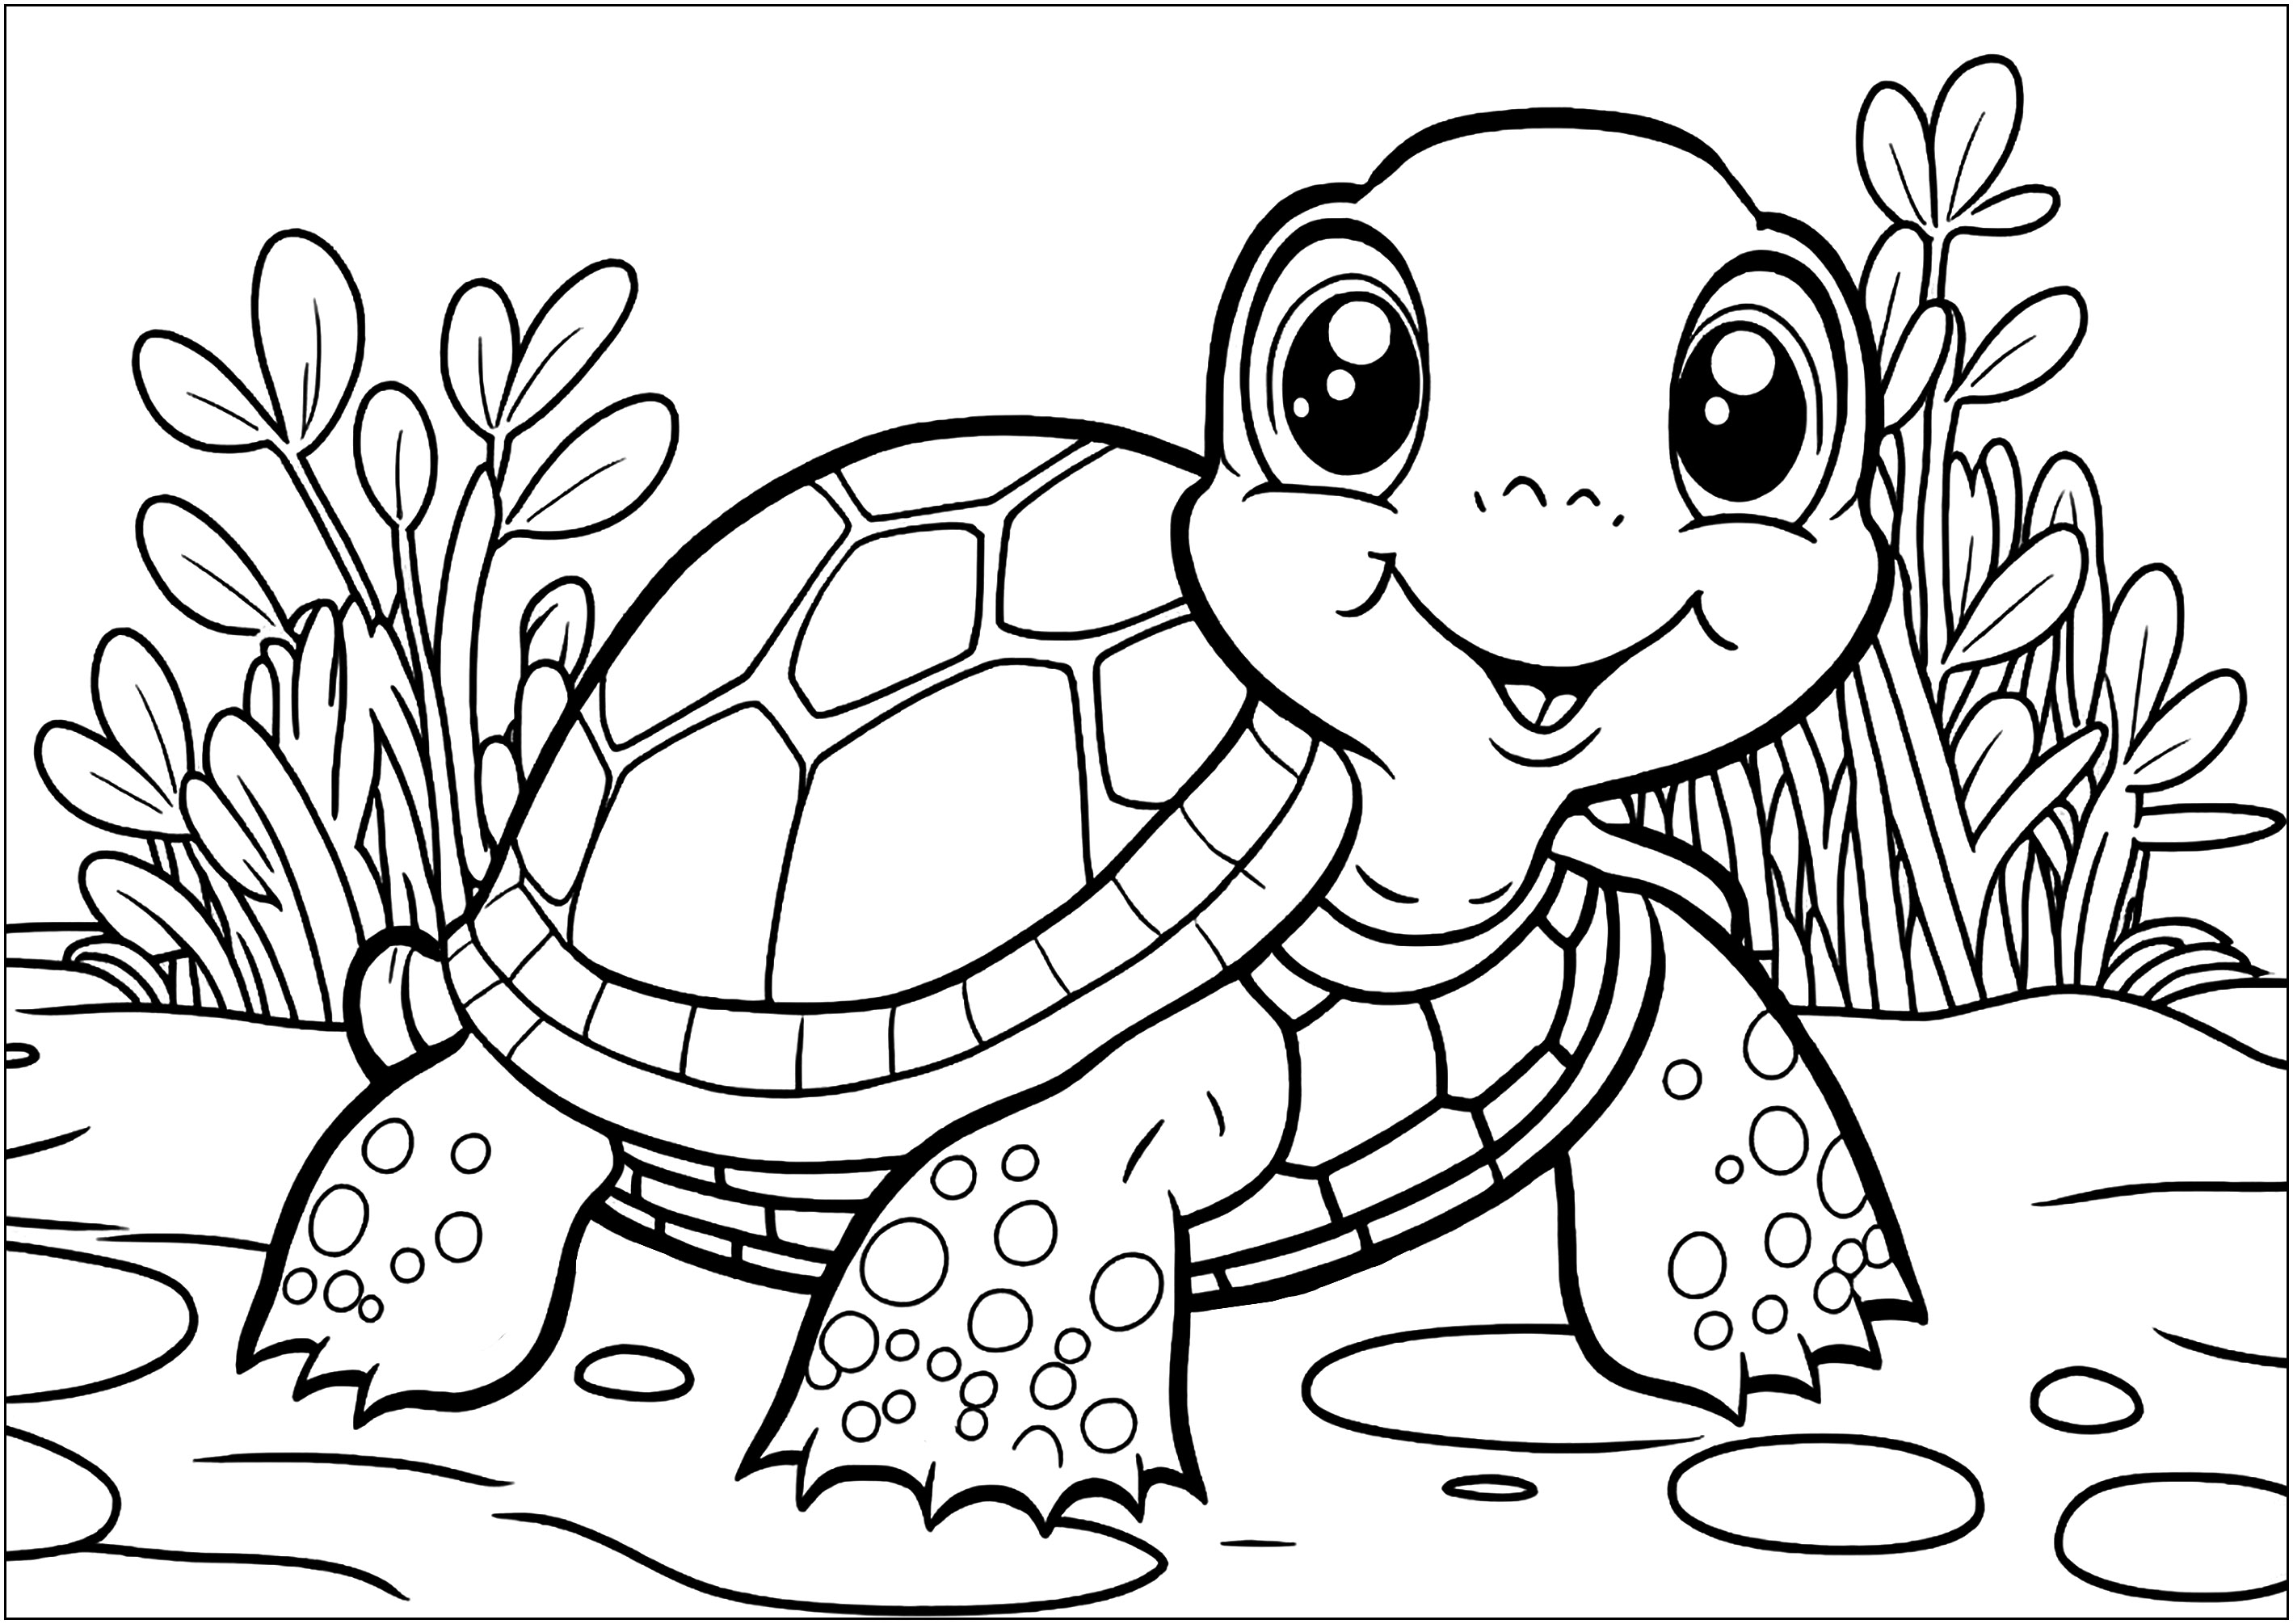 Pretty turtle with big eyes, very smiling, to color for the youngest